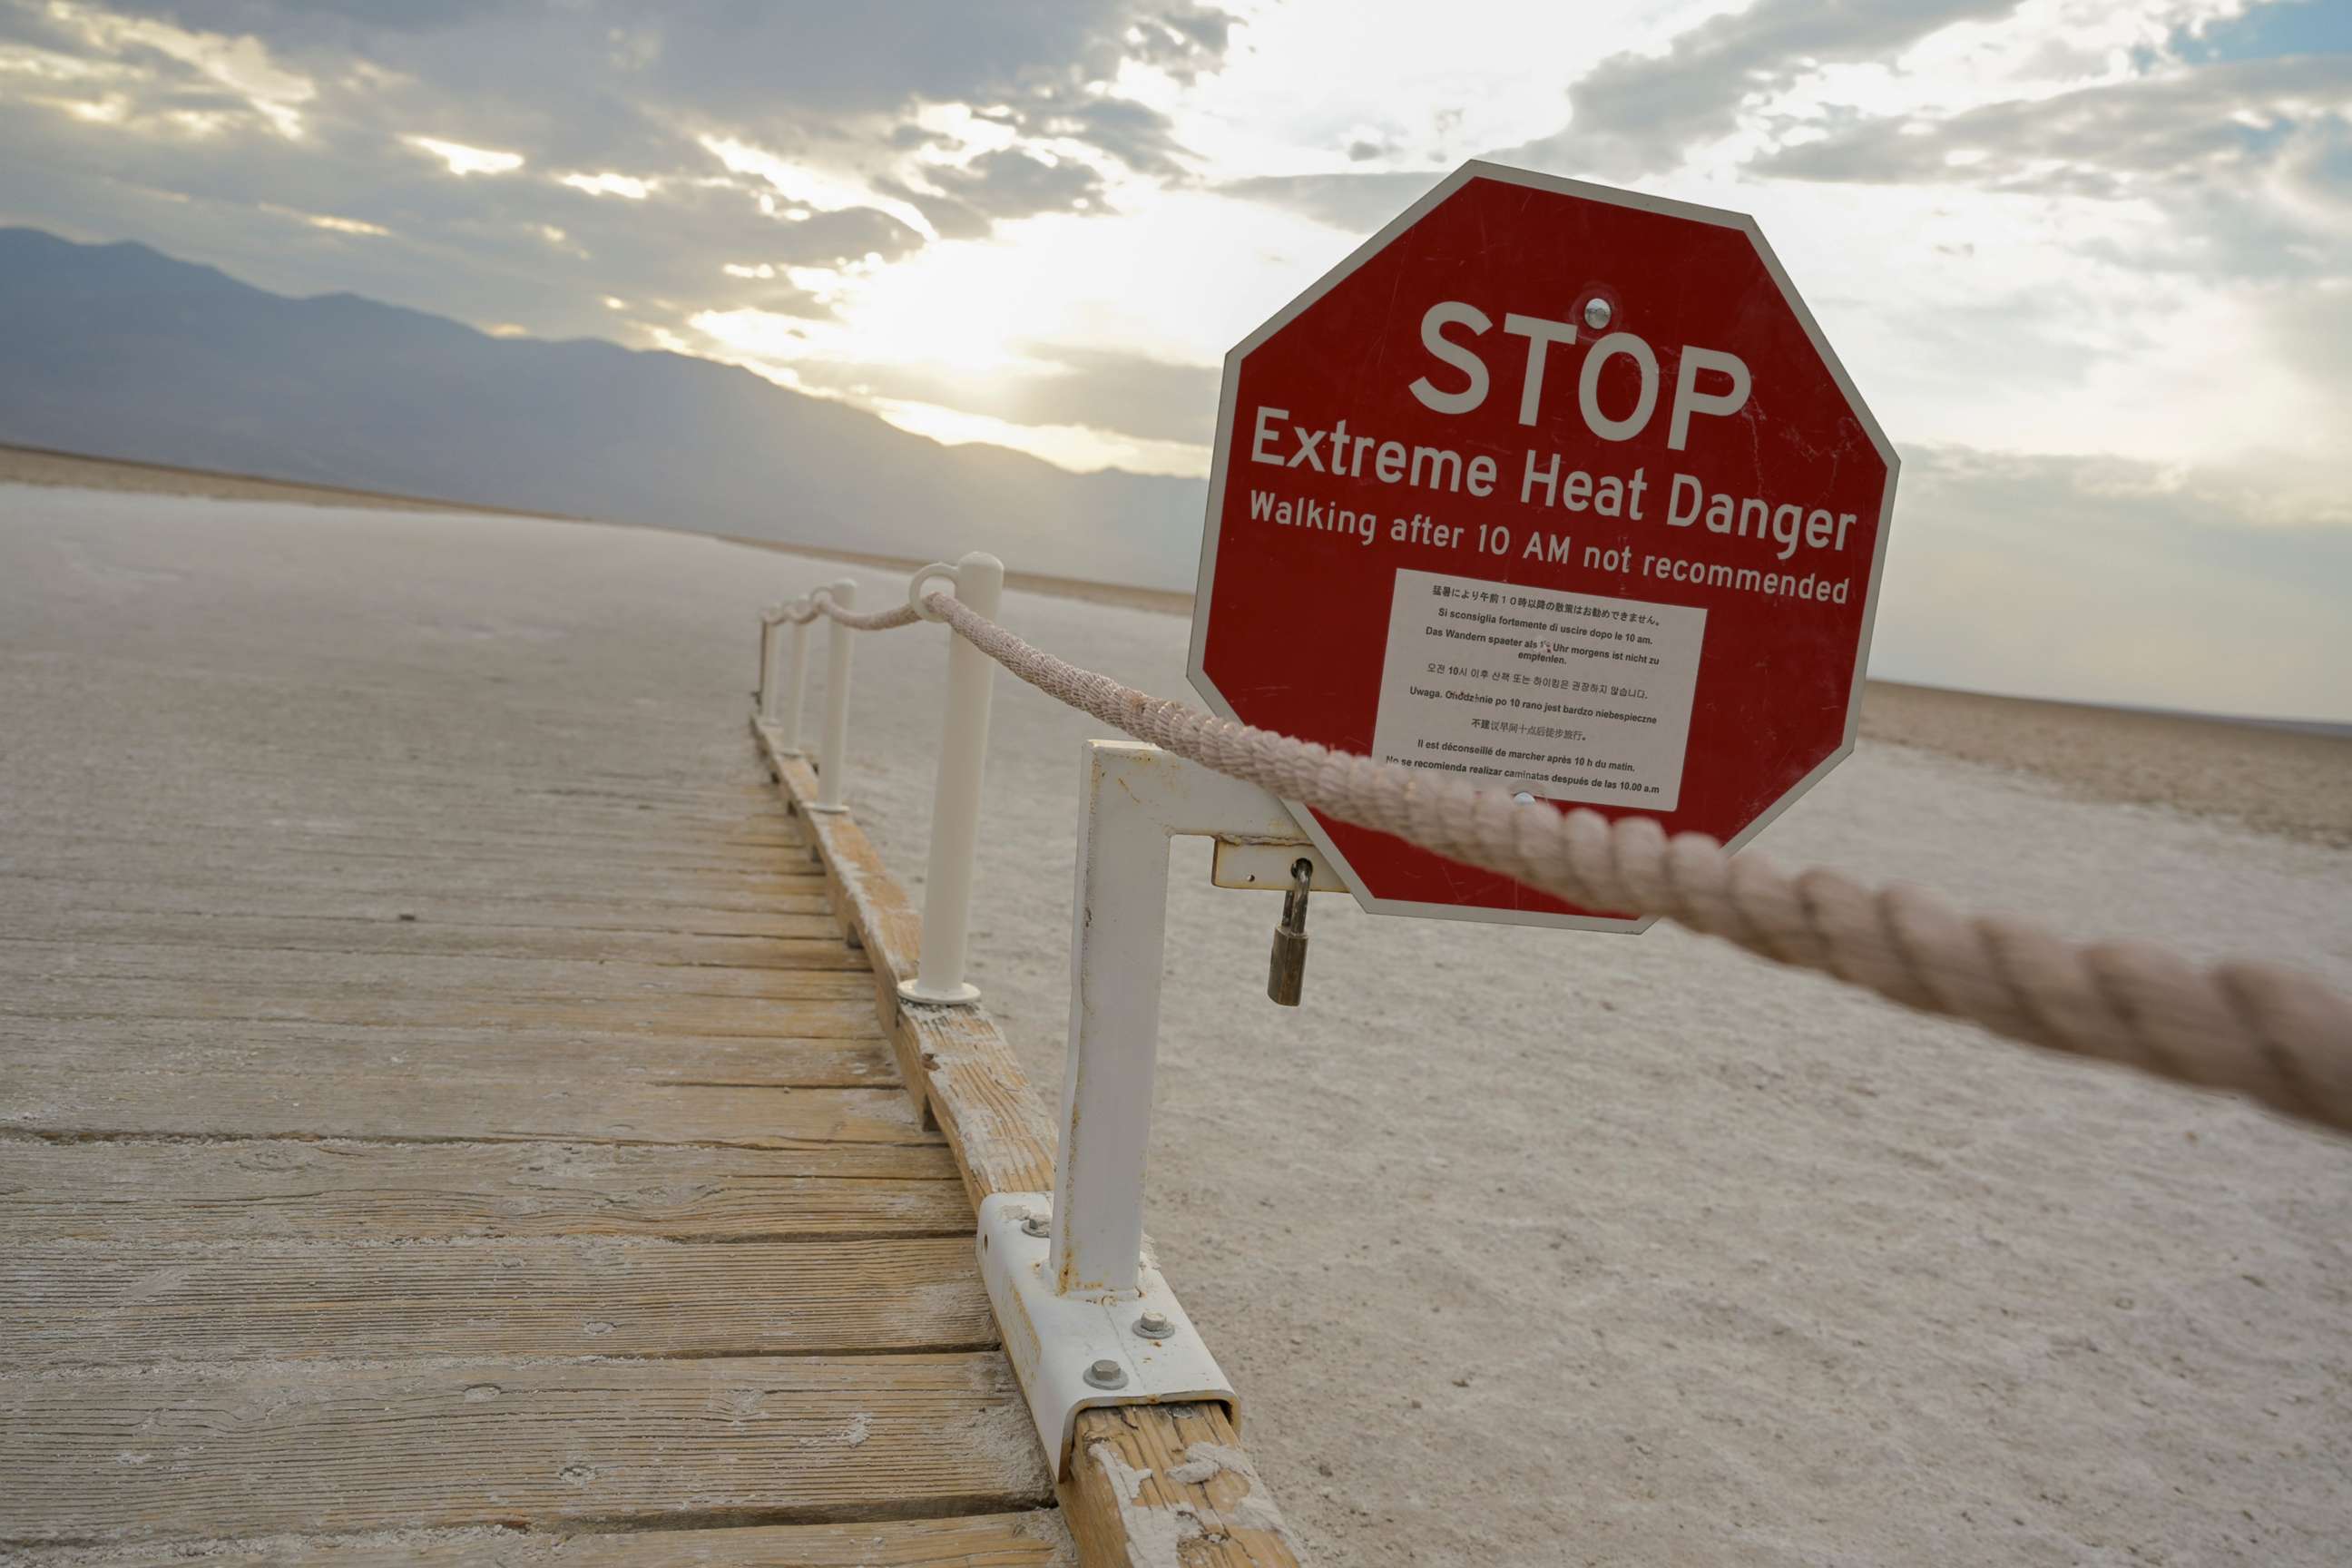 PHOTO: A sign warns of extreme heat in Death Valley, Calif., July 11, 2021.